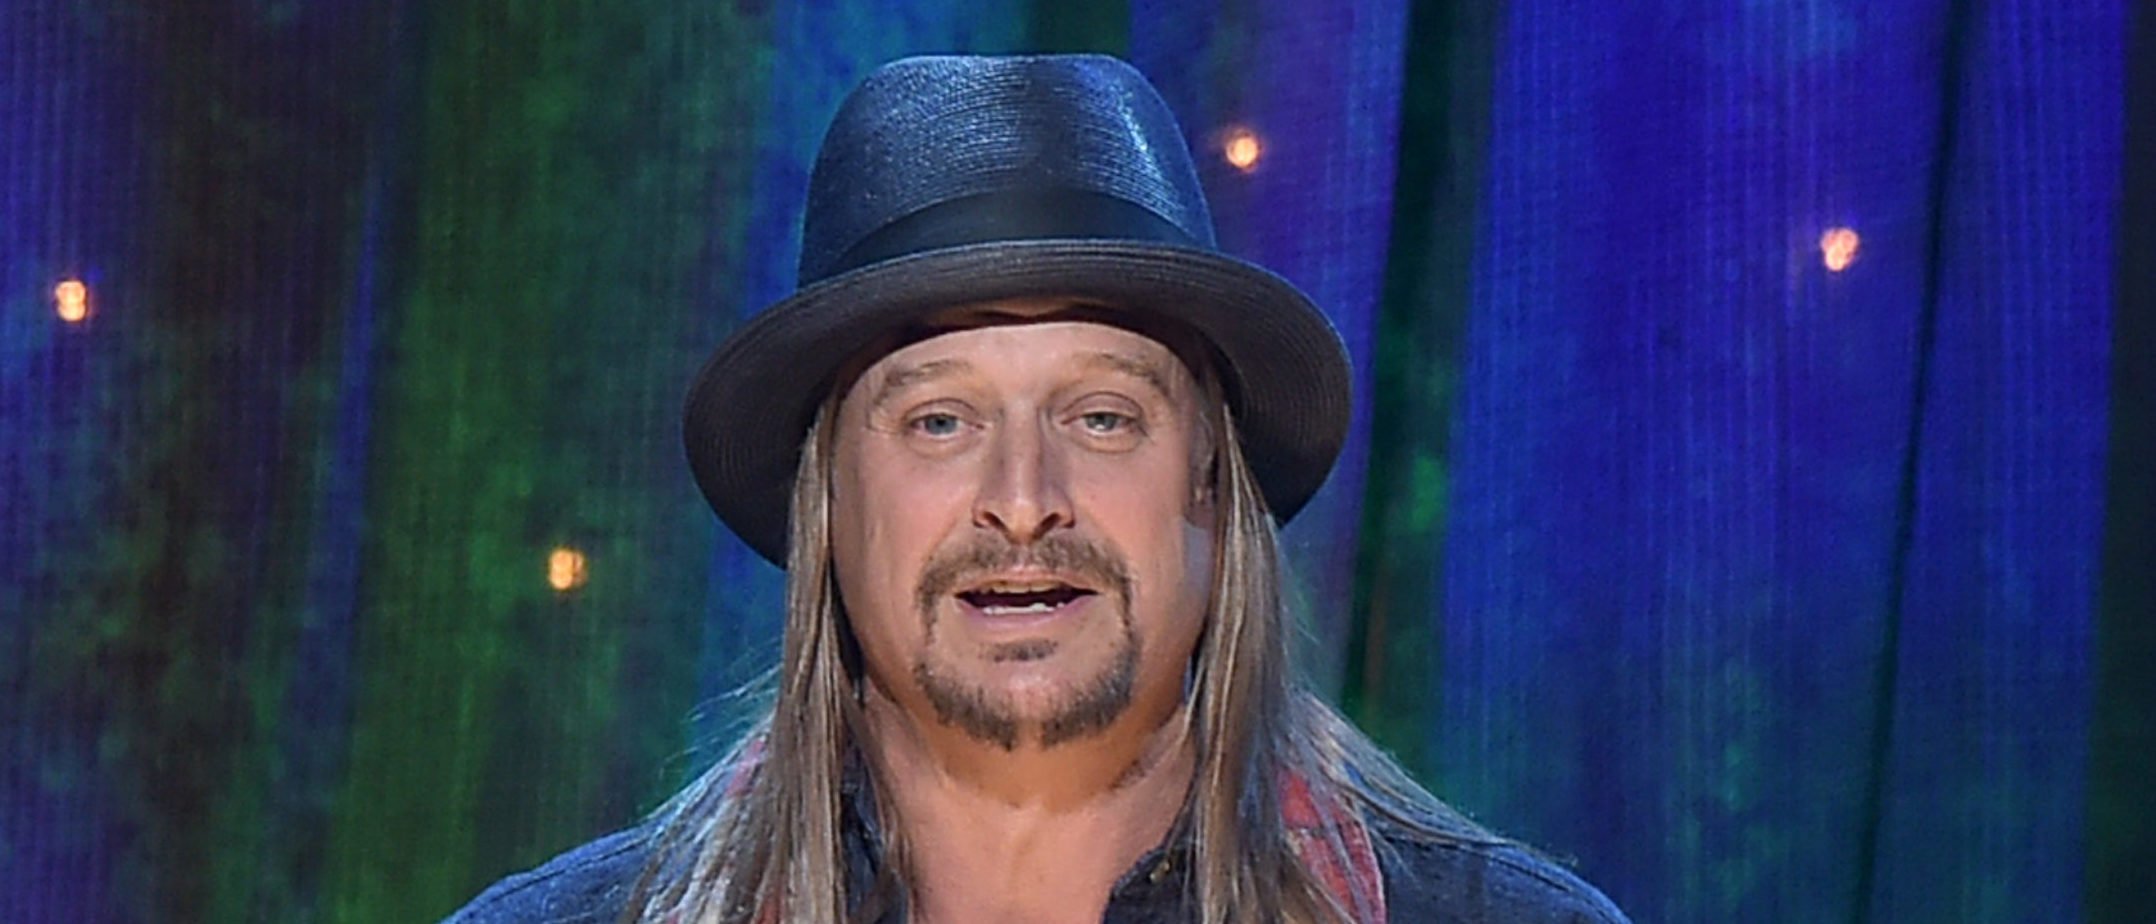 Kid Rock Doesn’t Want ‘Snowflakes’ At His Concert The Daily Caller